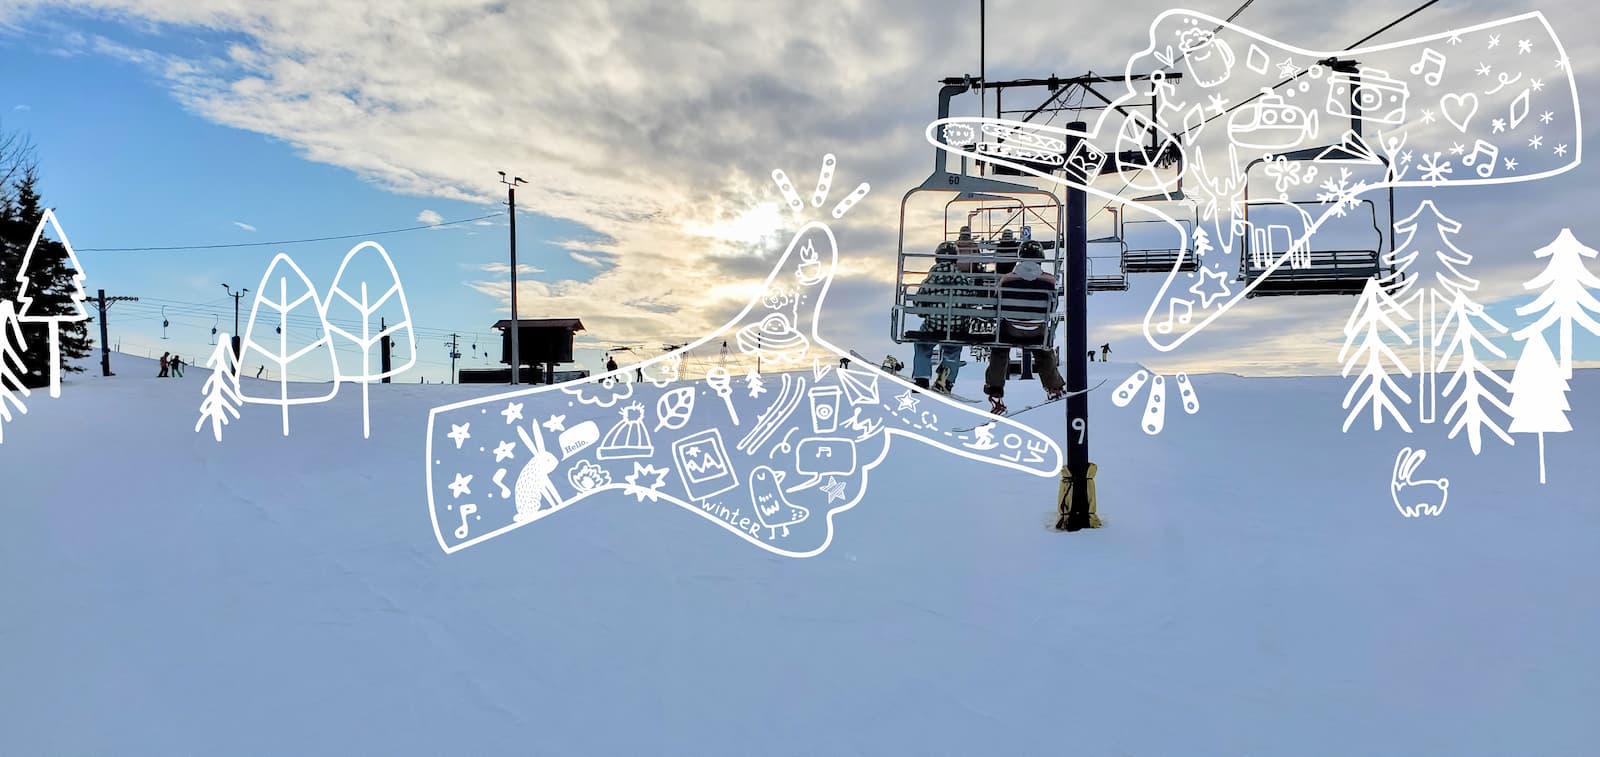 Featured image for “Rabbit Hill Snow Resort”